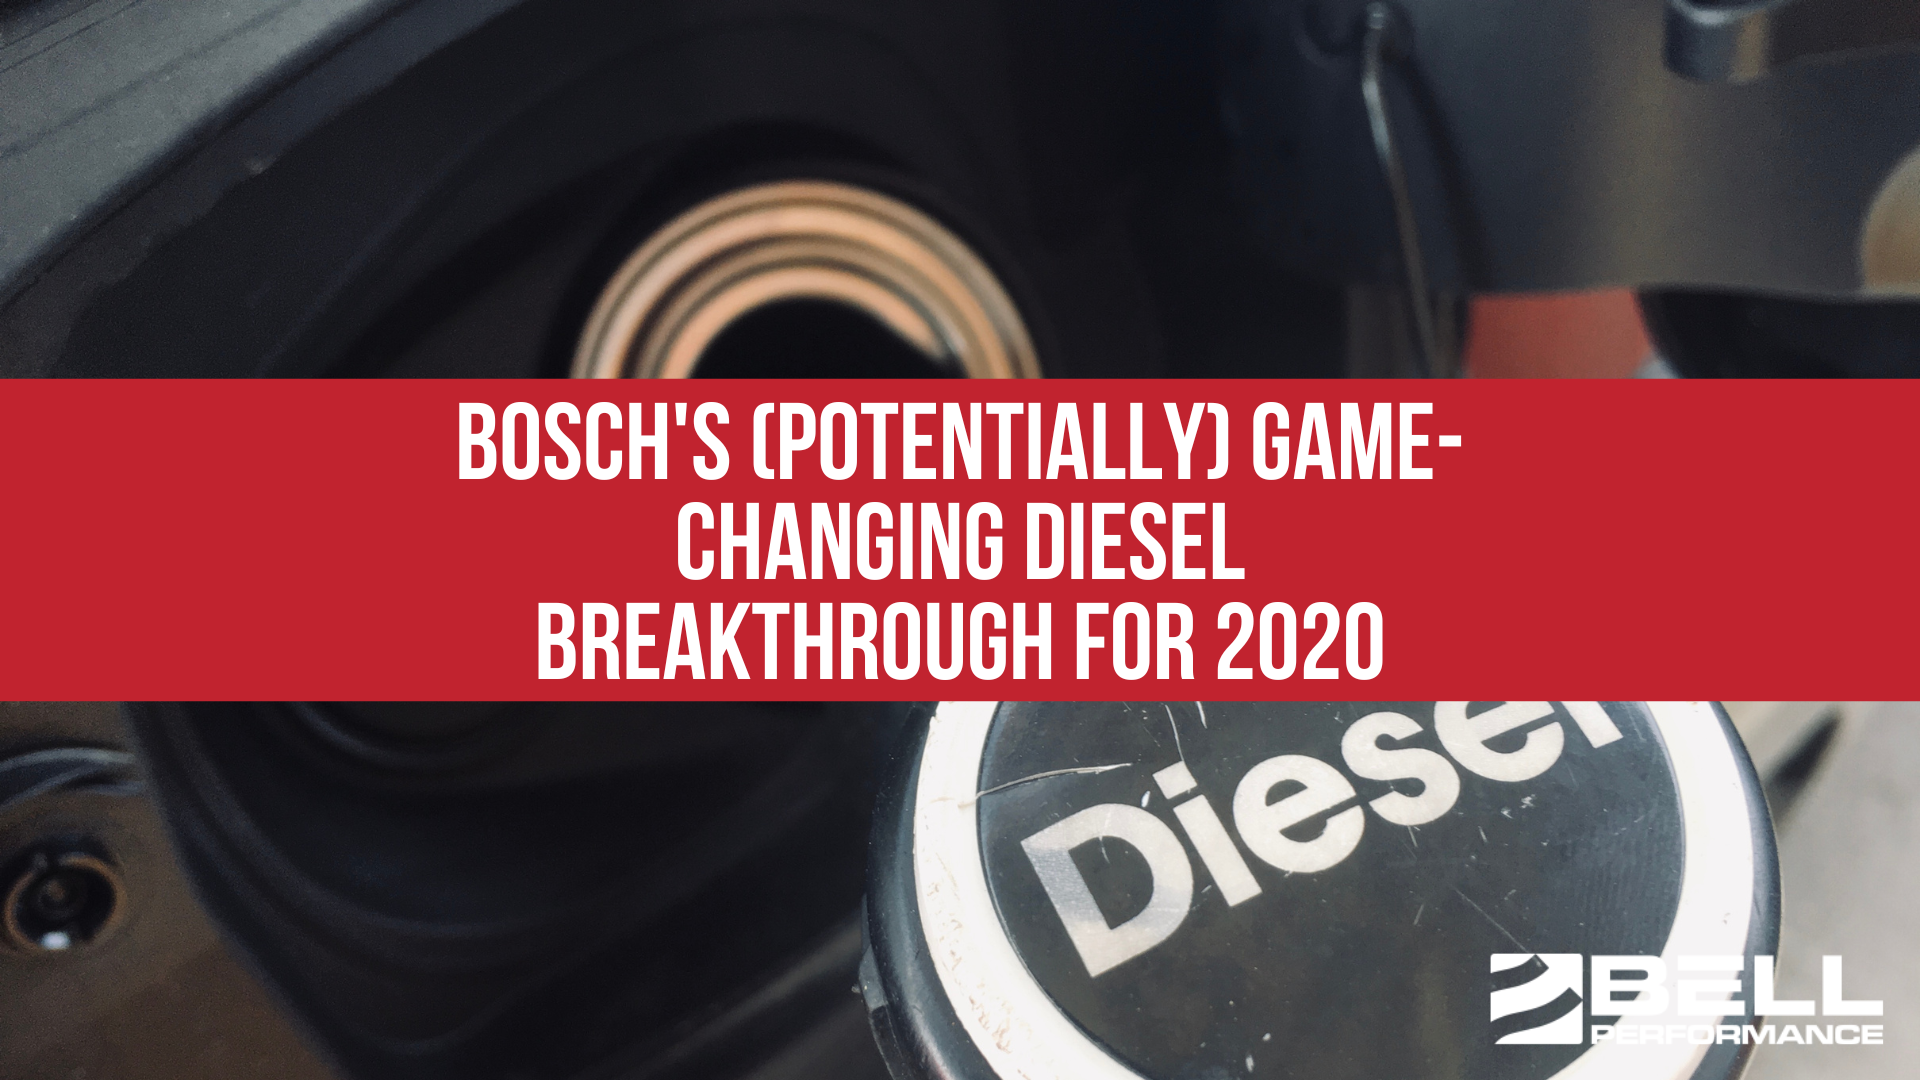 Bosch's (Potentially) Game-Changing Diesel Breakthrough for 2020